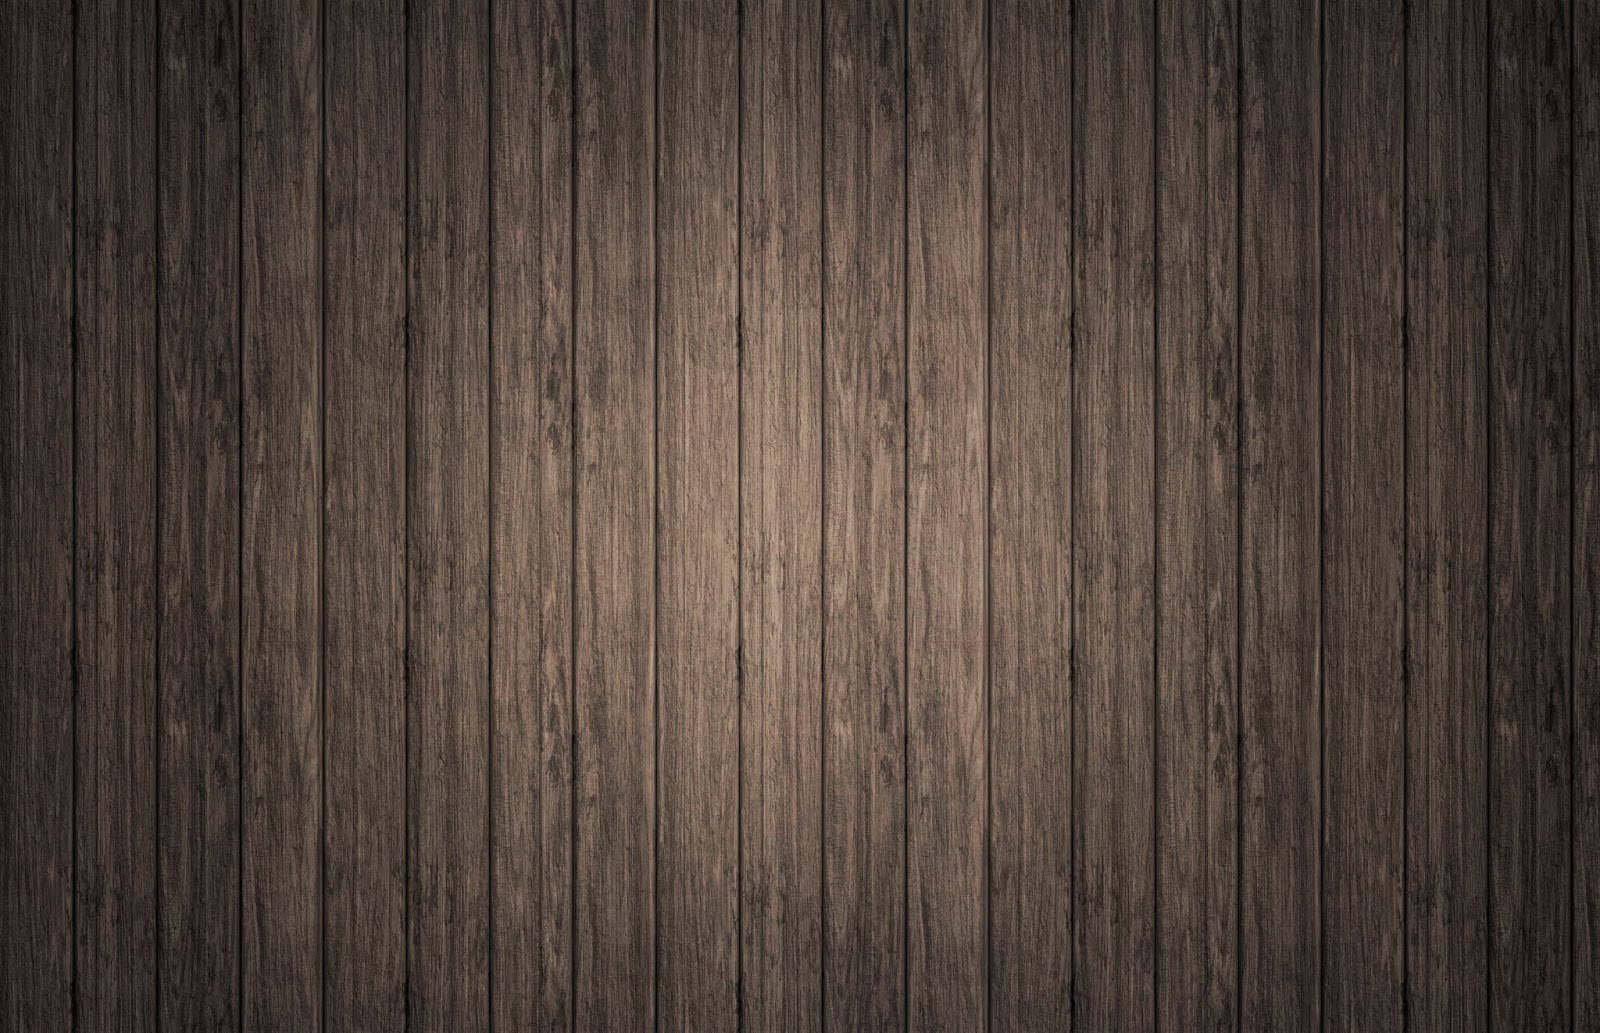 wooden-background-texture-pattern-images-for-website-hd ...